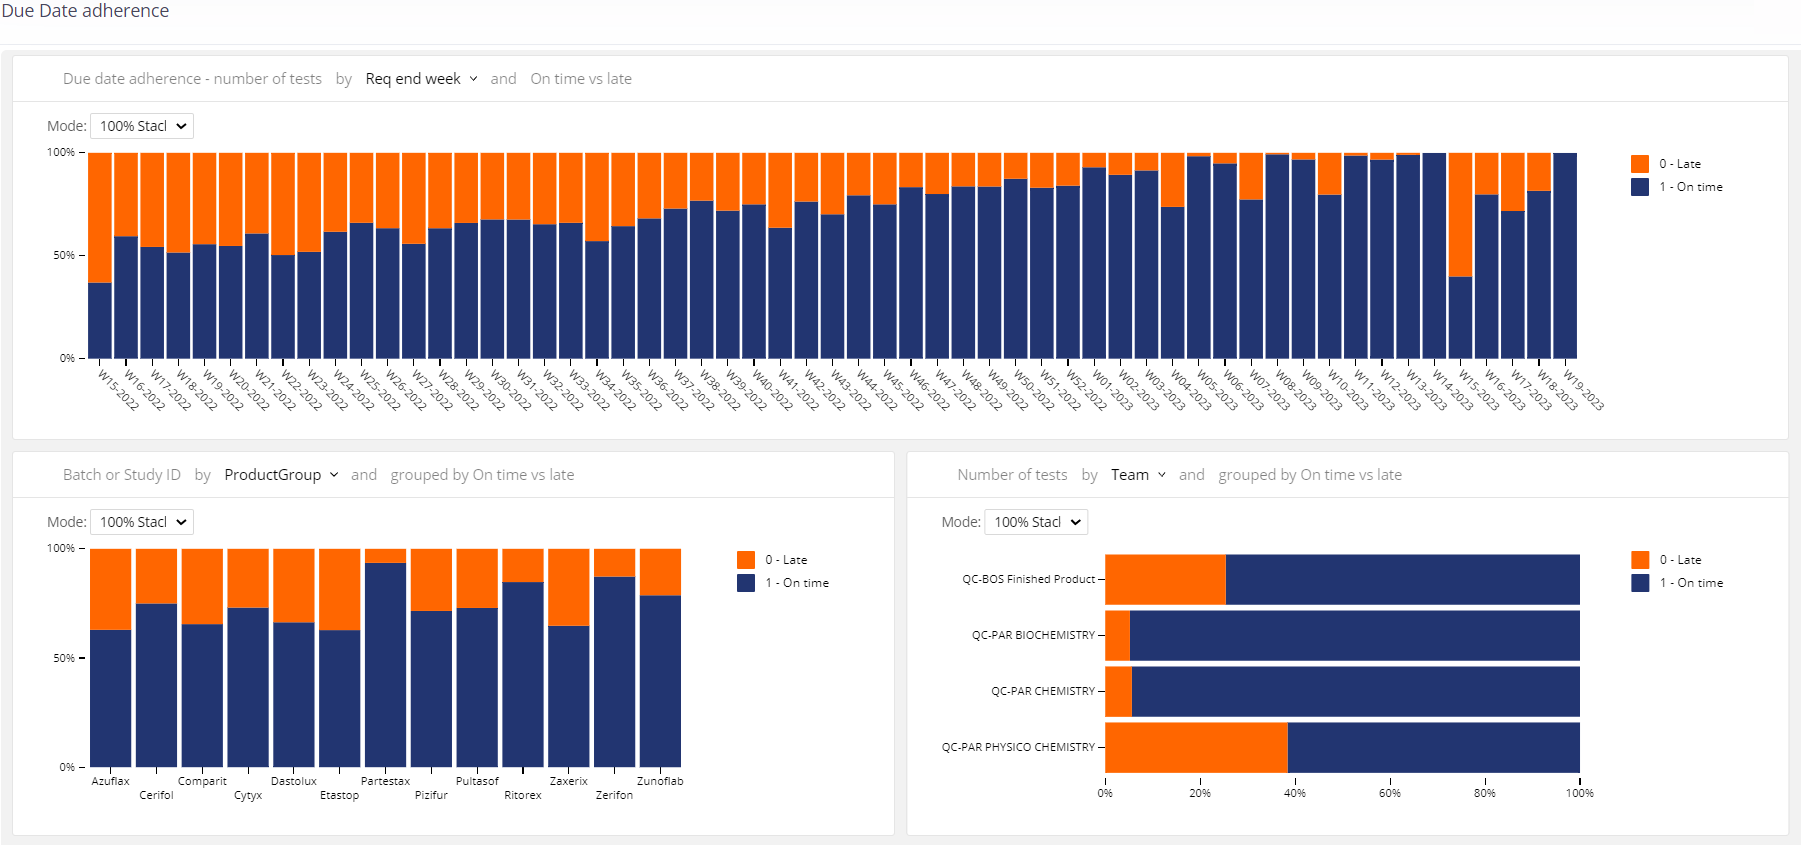 An example of a due date adherence KPI dashboard for pharmaceutical QC departments, presenting monthly late vs on-time metrics across all work and late vs on-time rates per product and laboratory team